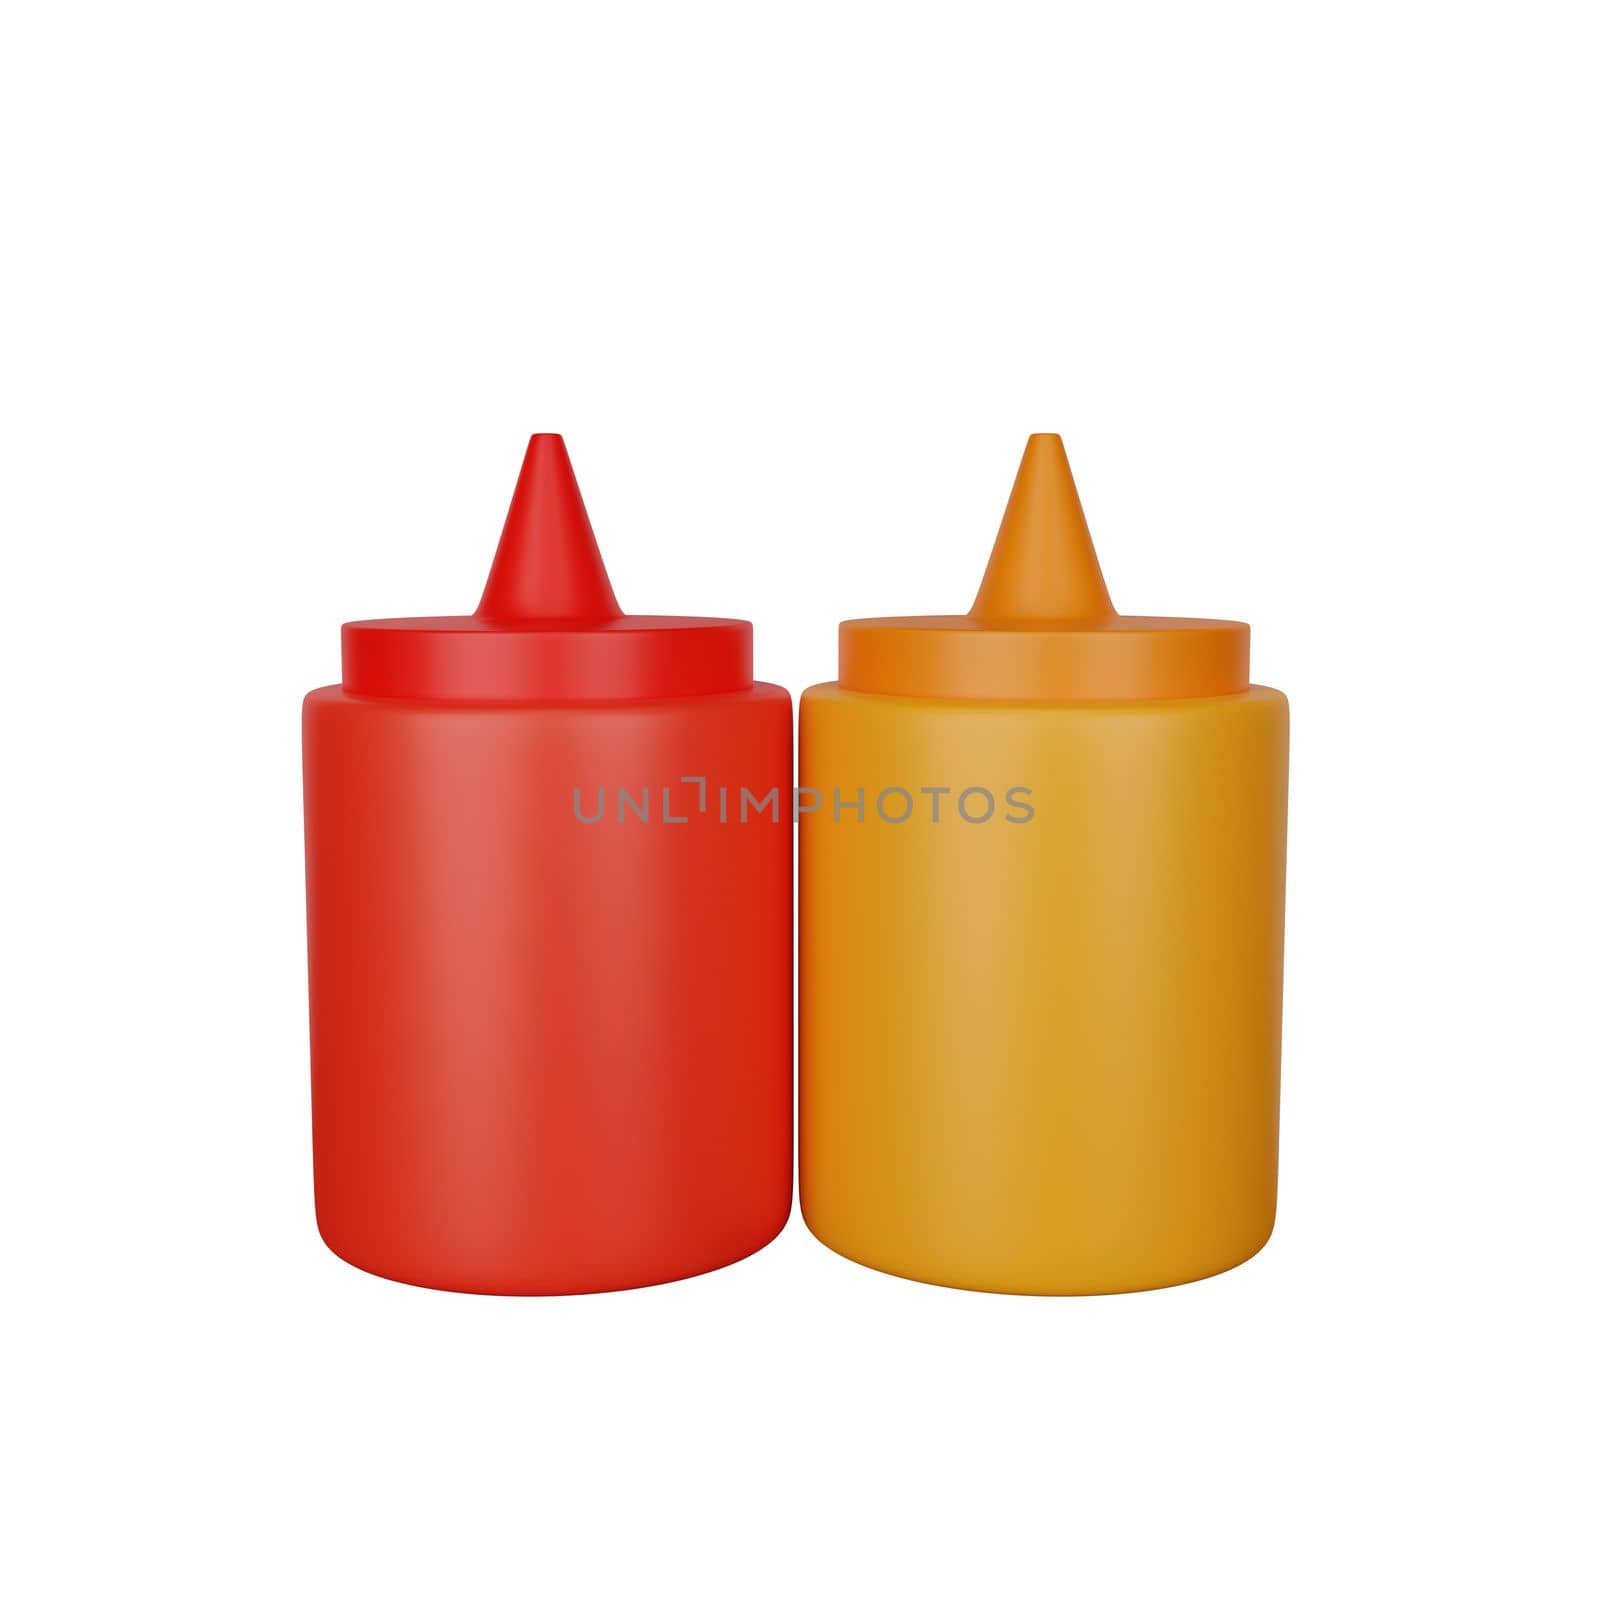 3d rendering of ketchup mustard fast food icon